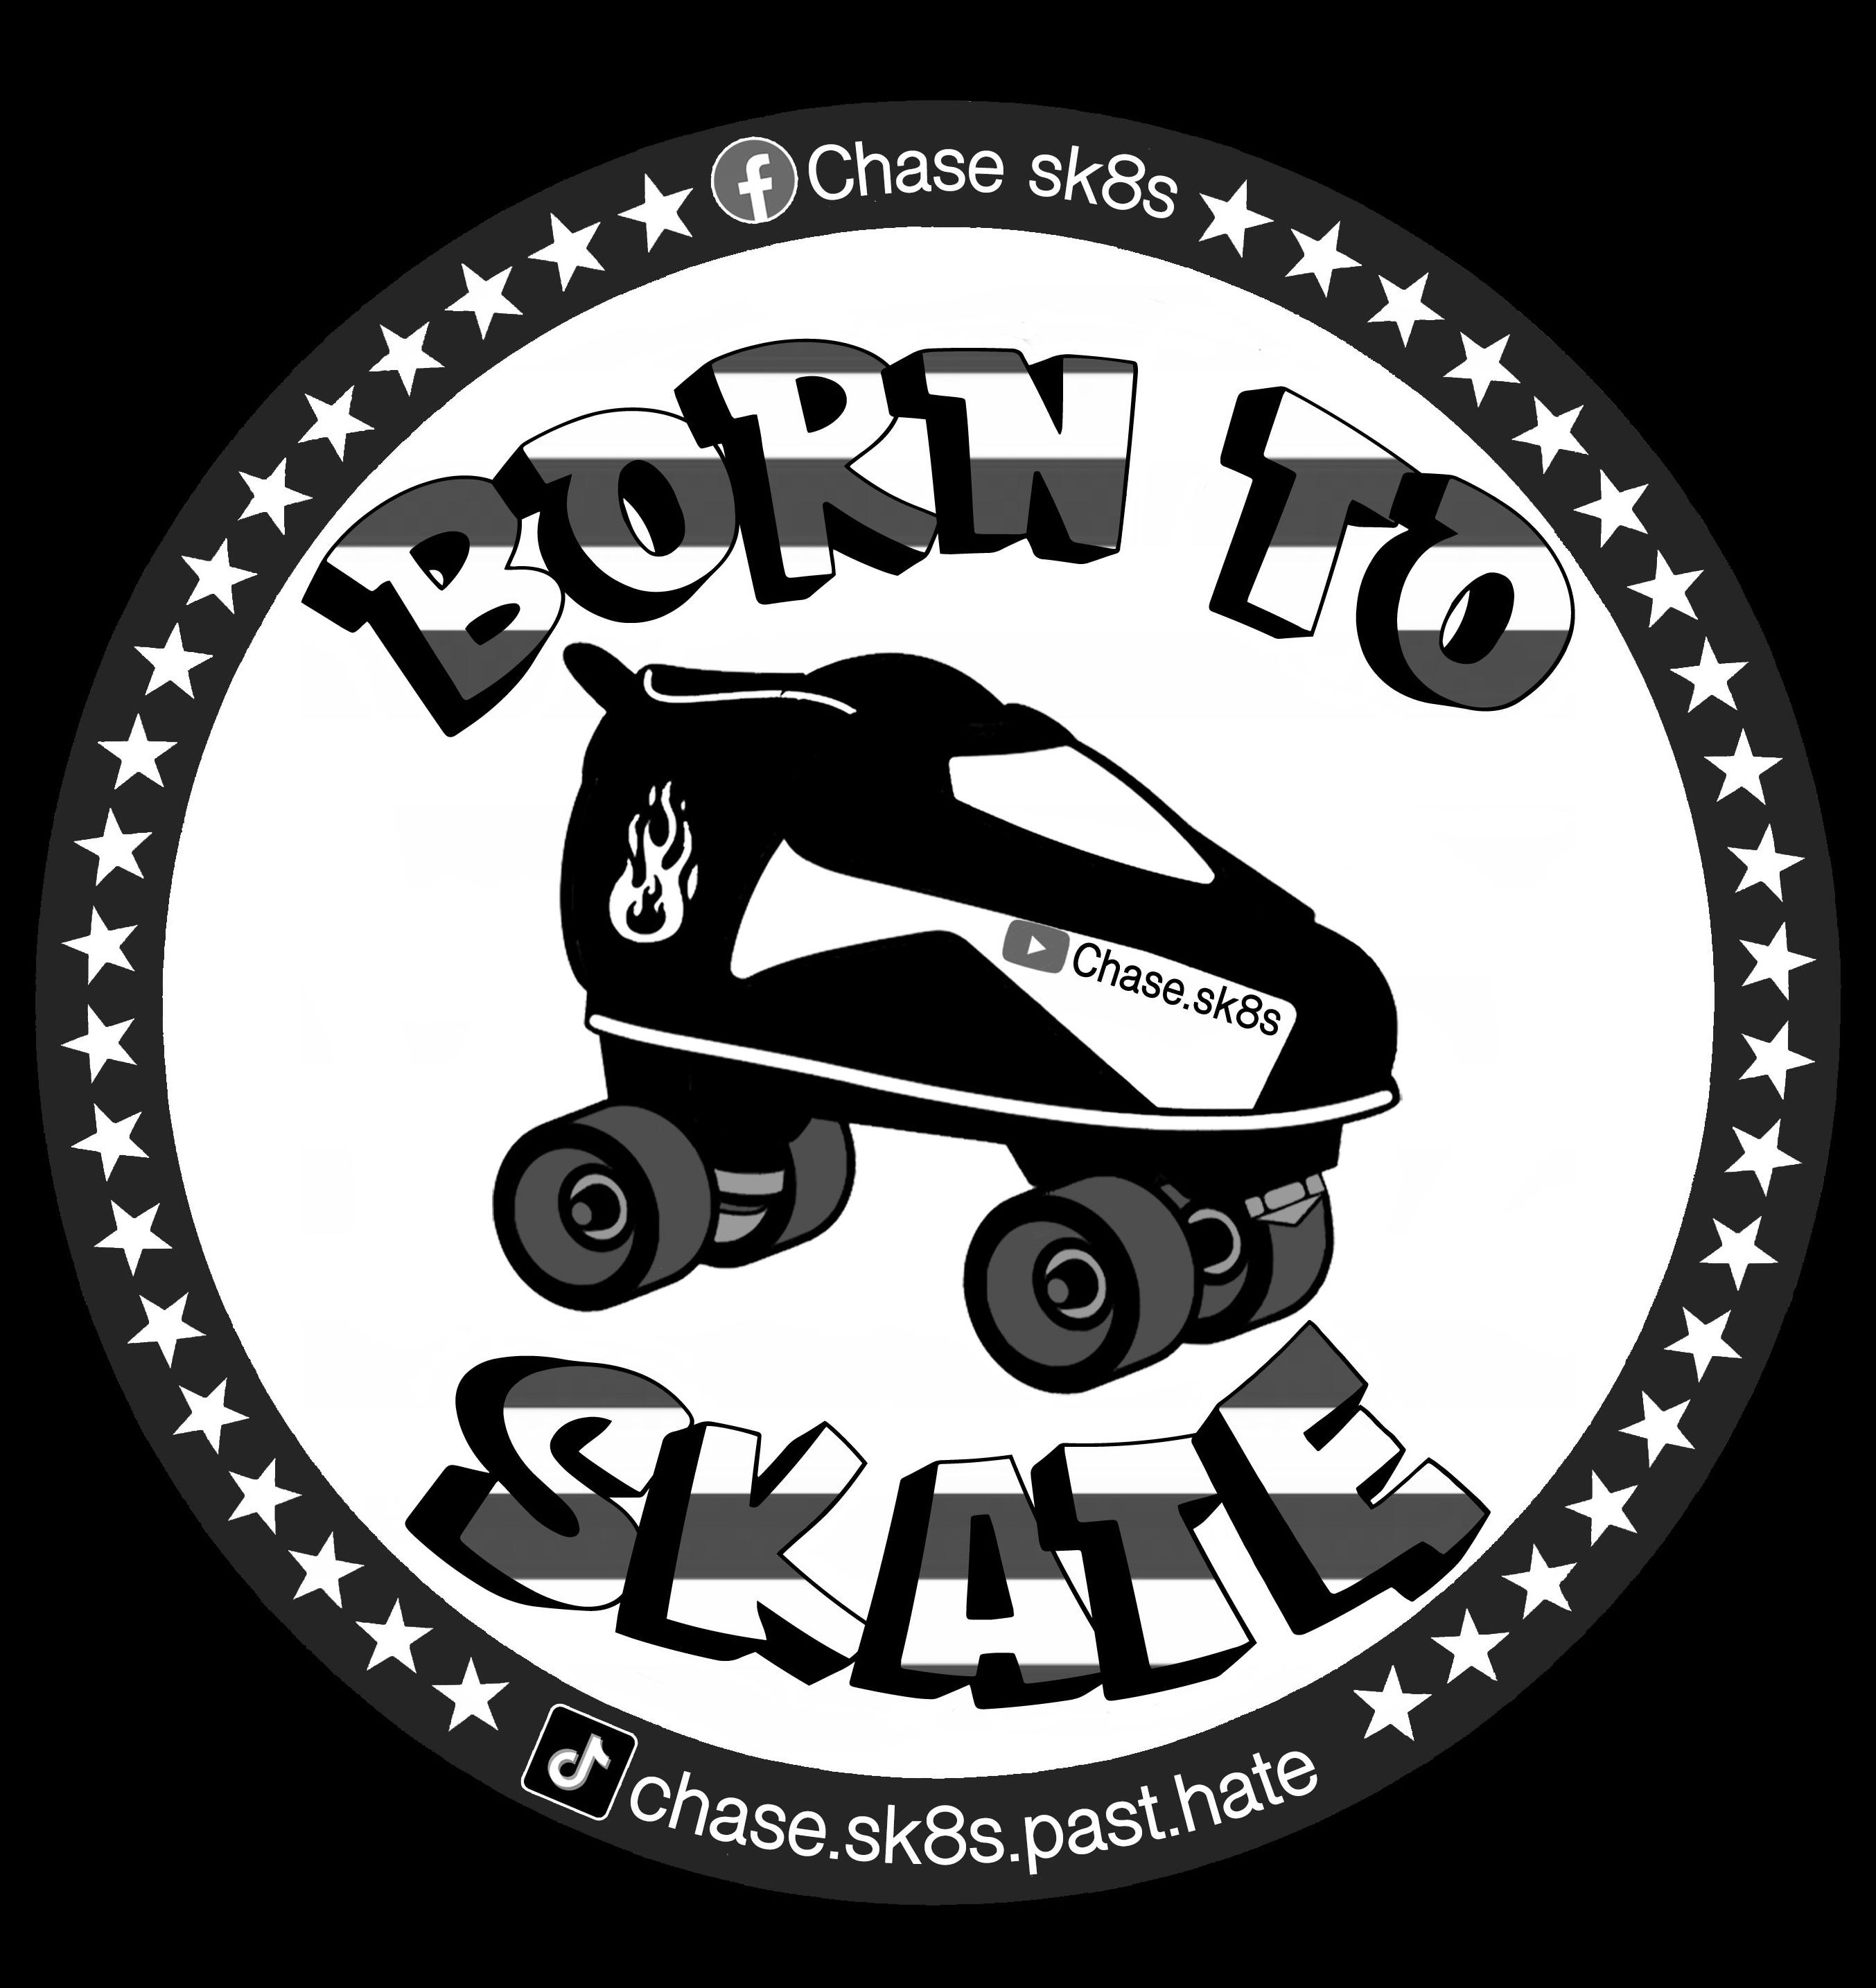  BORN TO SKATE, CHASE.SKATES.PAST.HATE, CHASE.SK8S AND CHASE SK8S